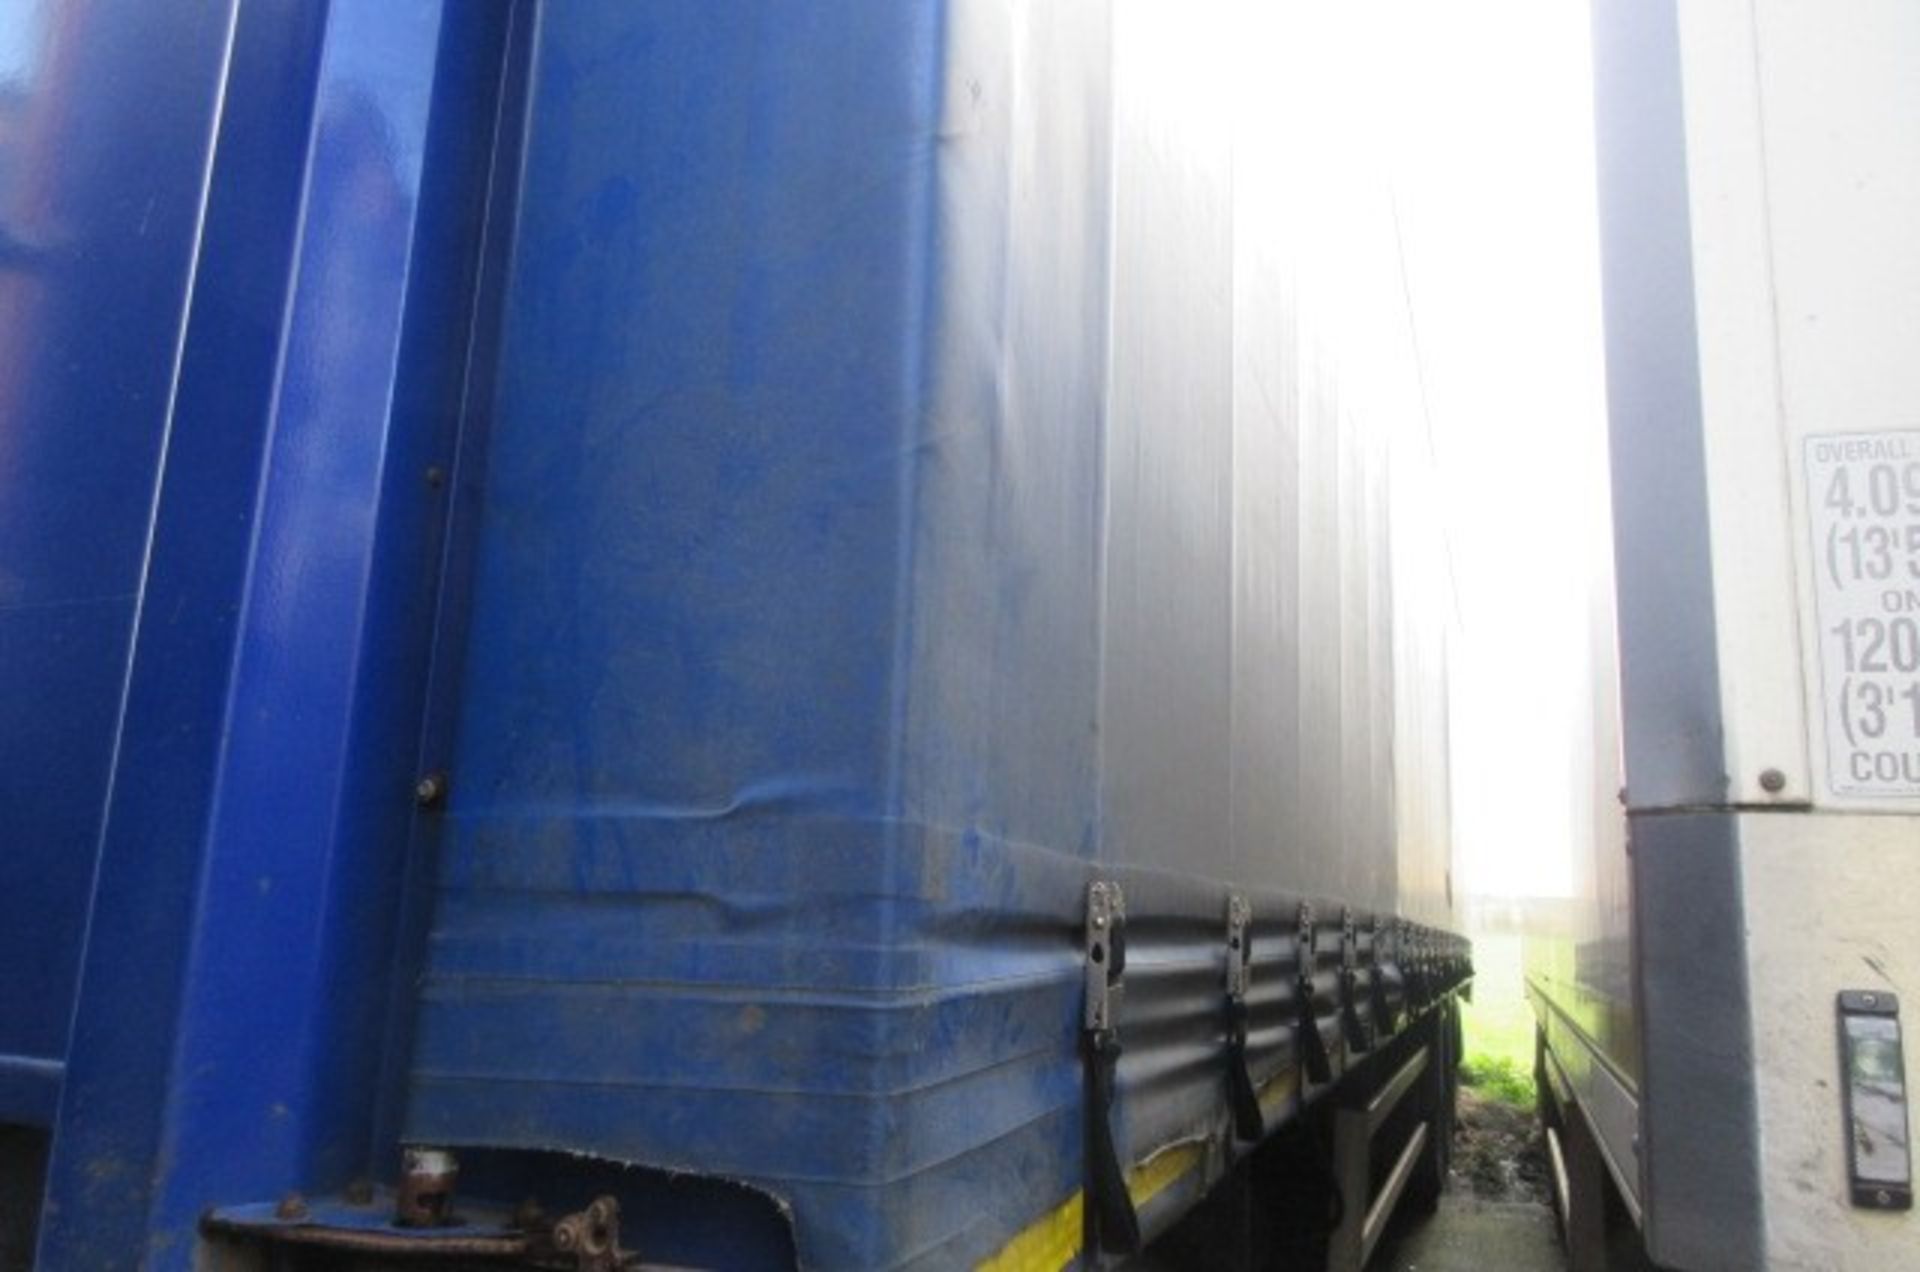 SDC 13.7m tri-axle curtainside trailer (2012) - Image 4 of 8